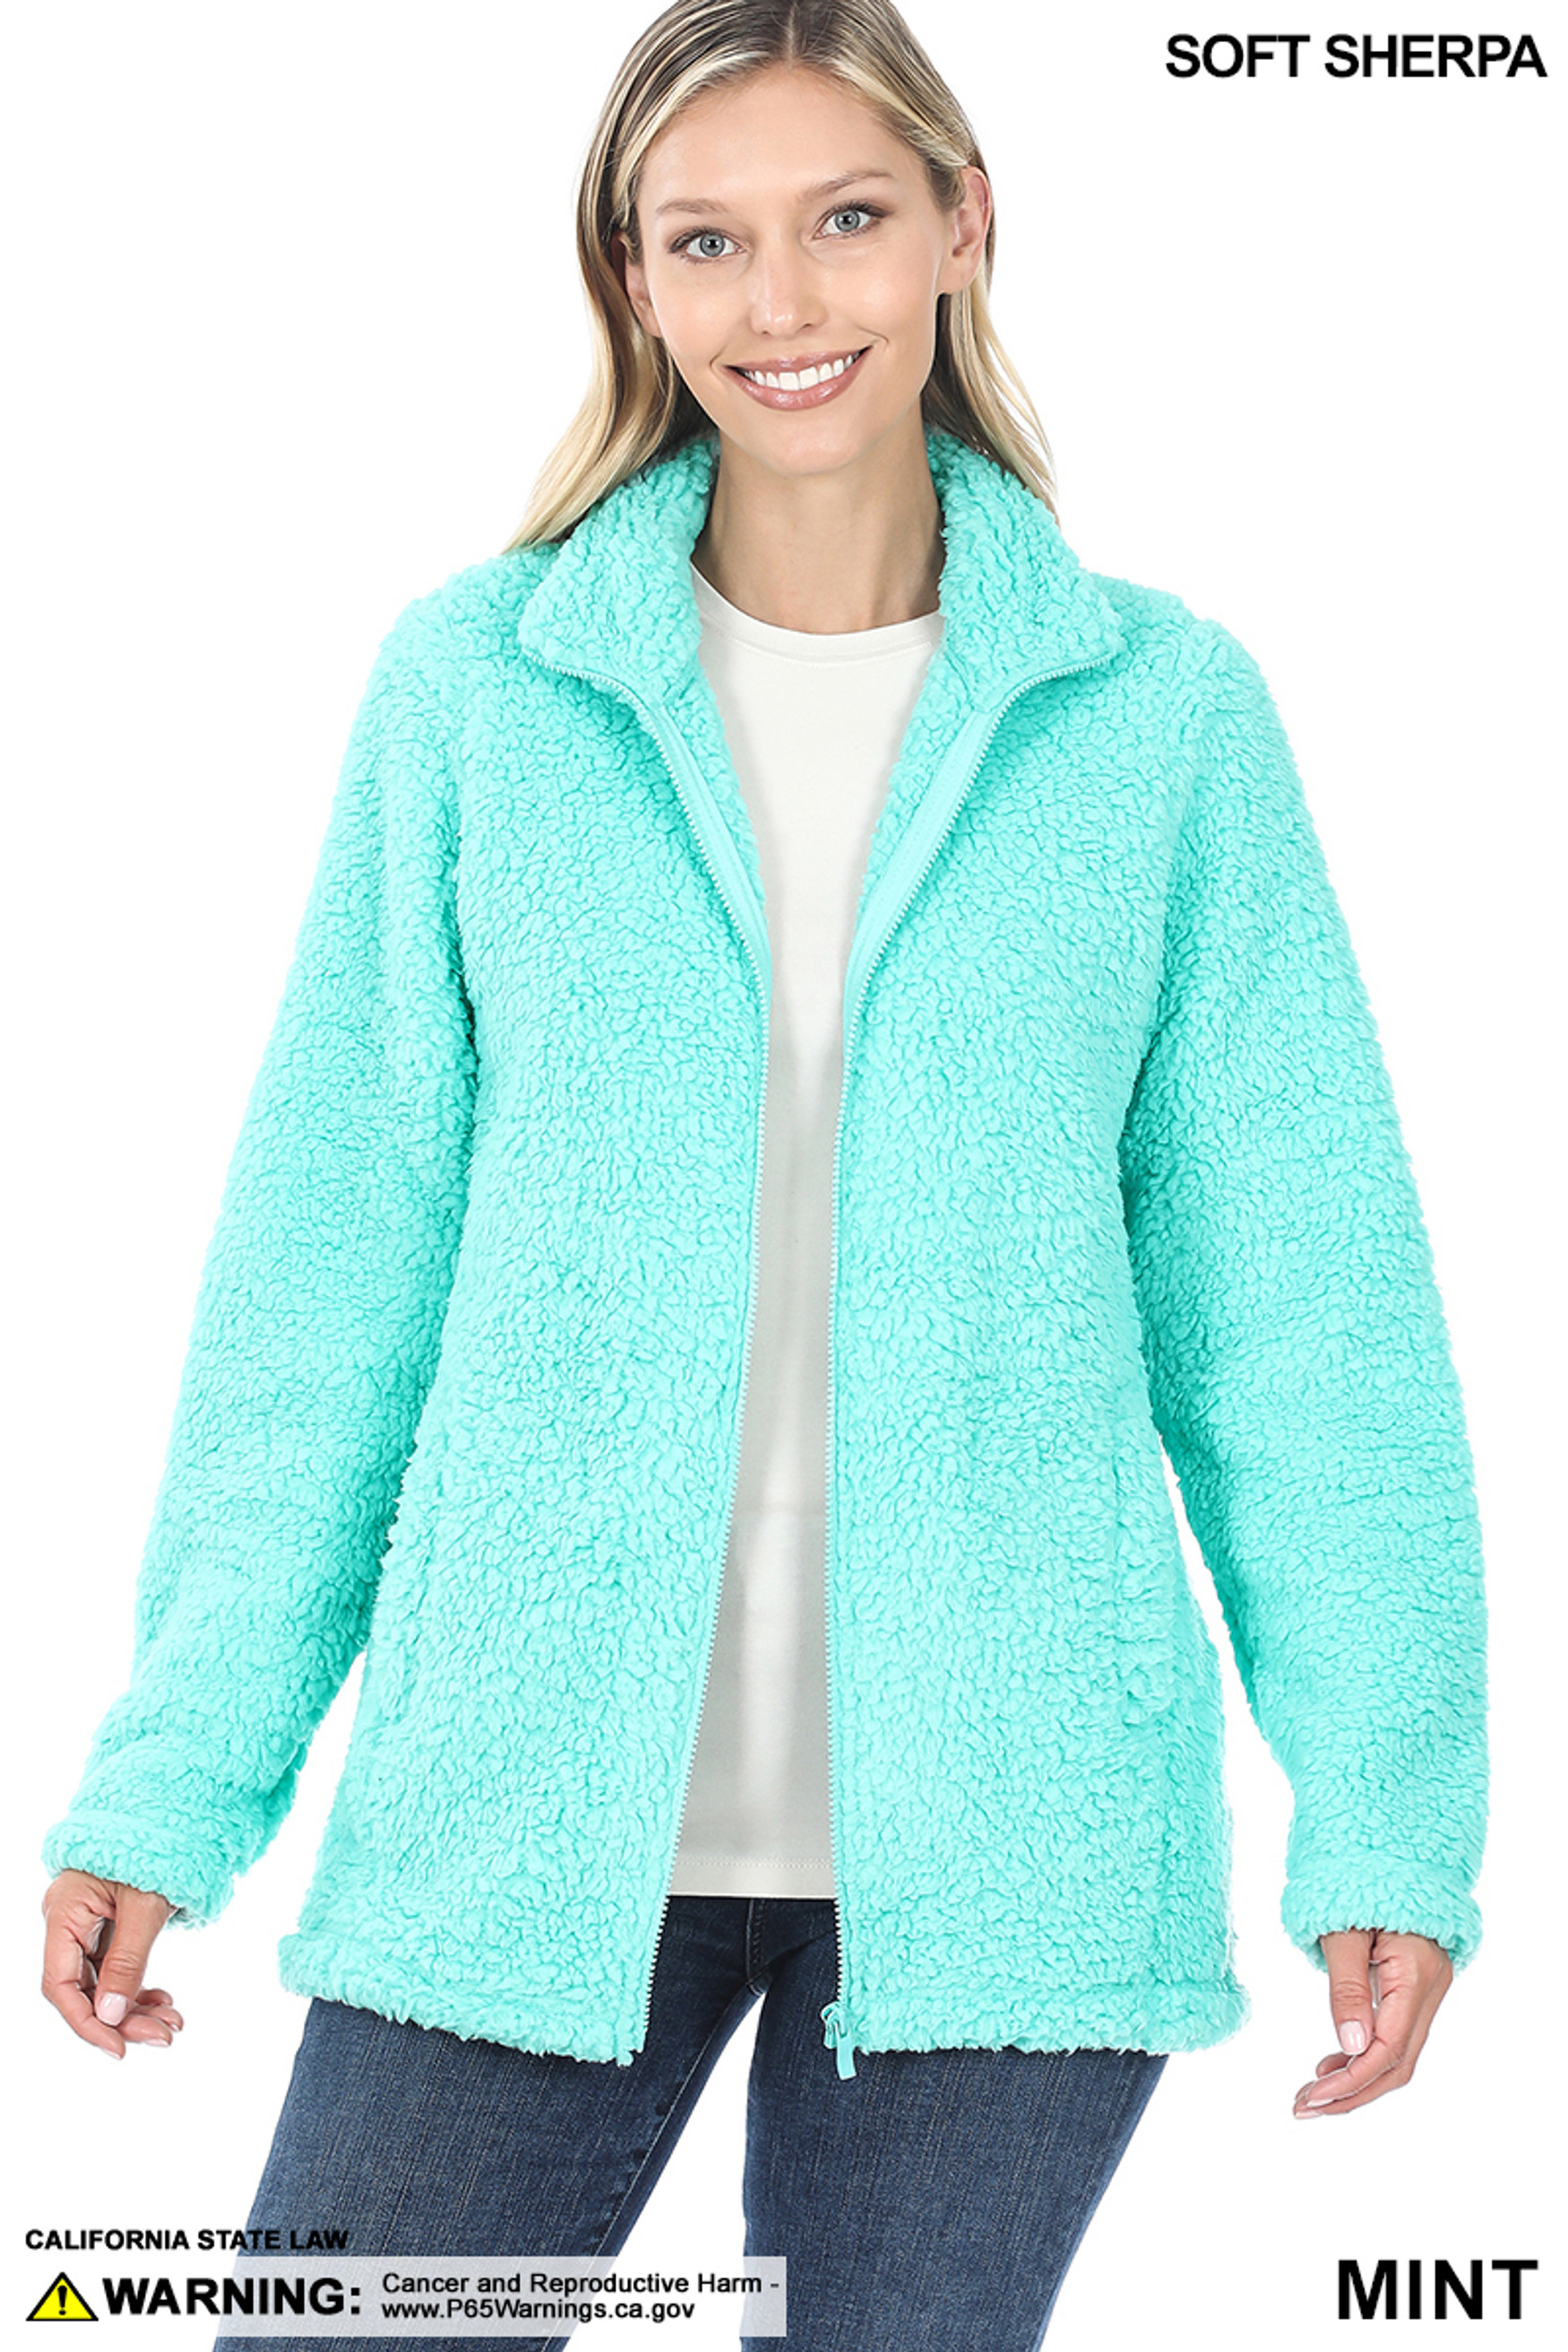 Front Unzipped image of Mint Sherpa Zip Up Jacket with Side Pockets